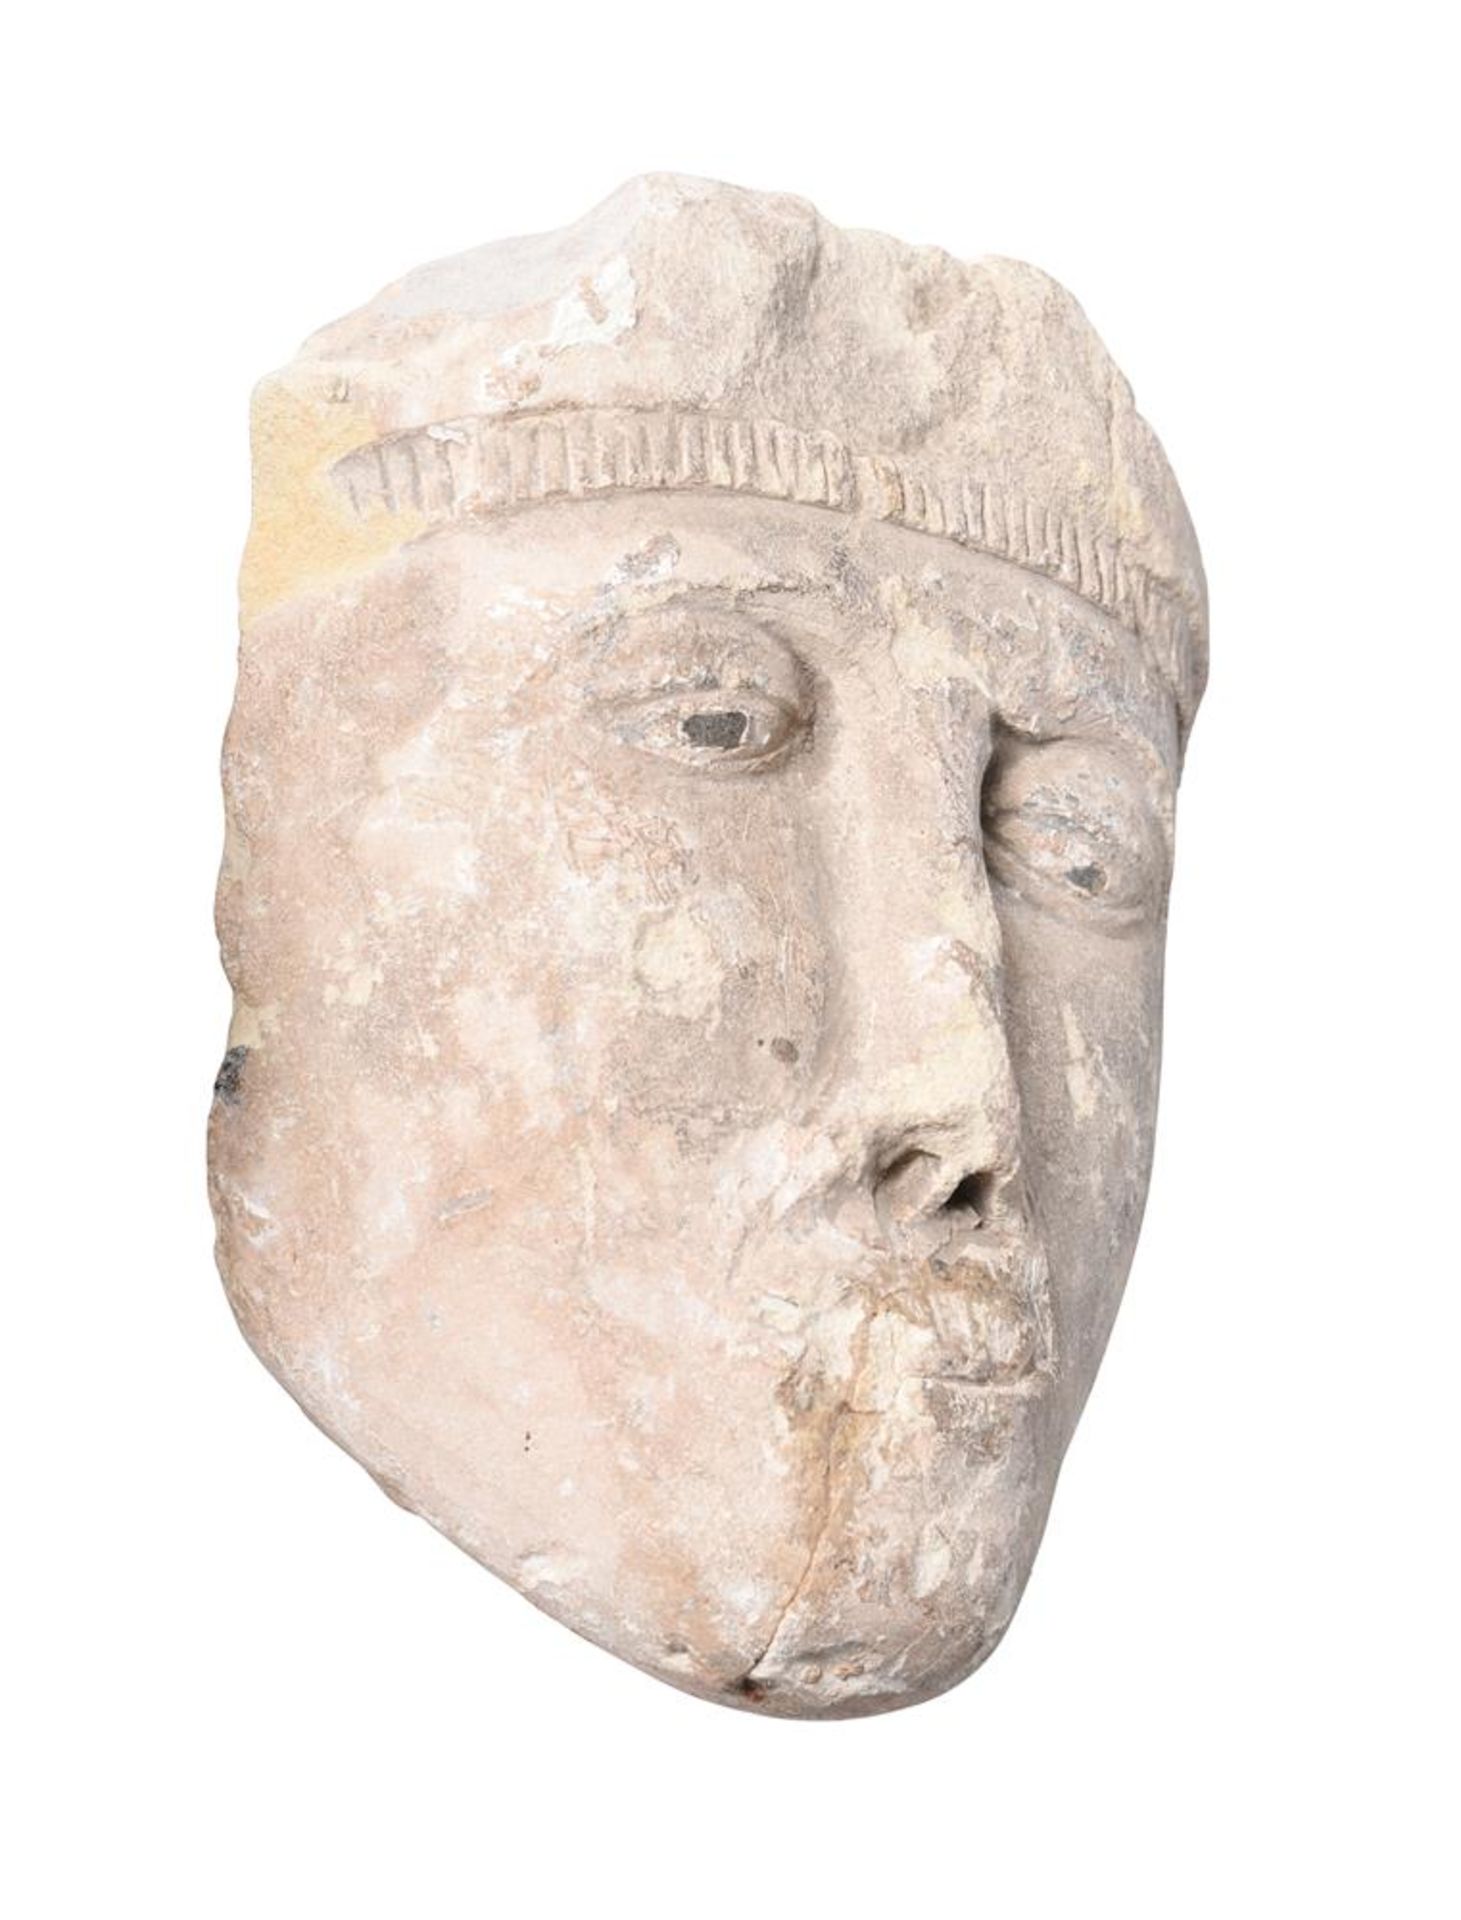 TWO FRAGMENTARY CARVED STONE HEADS, PROBABLY 11TH-13TH CENTURIES - Image 4 of 5